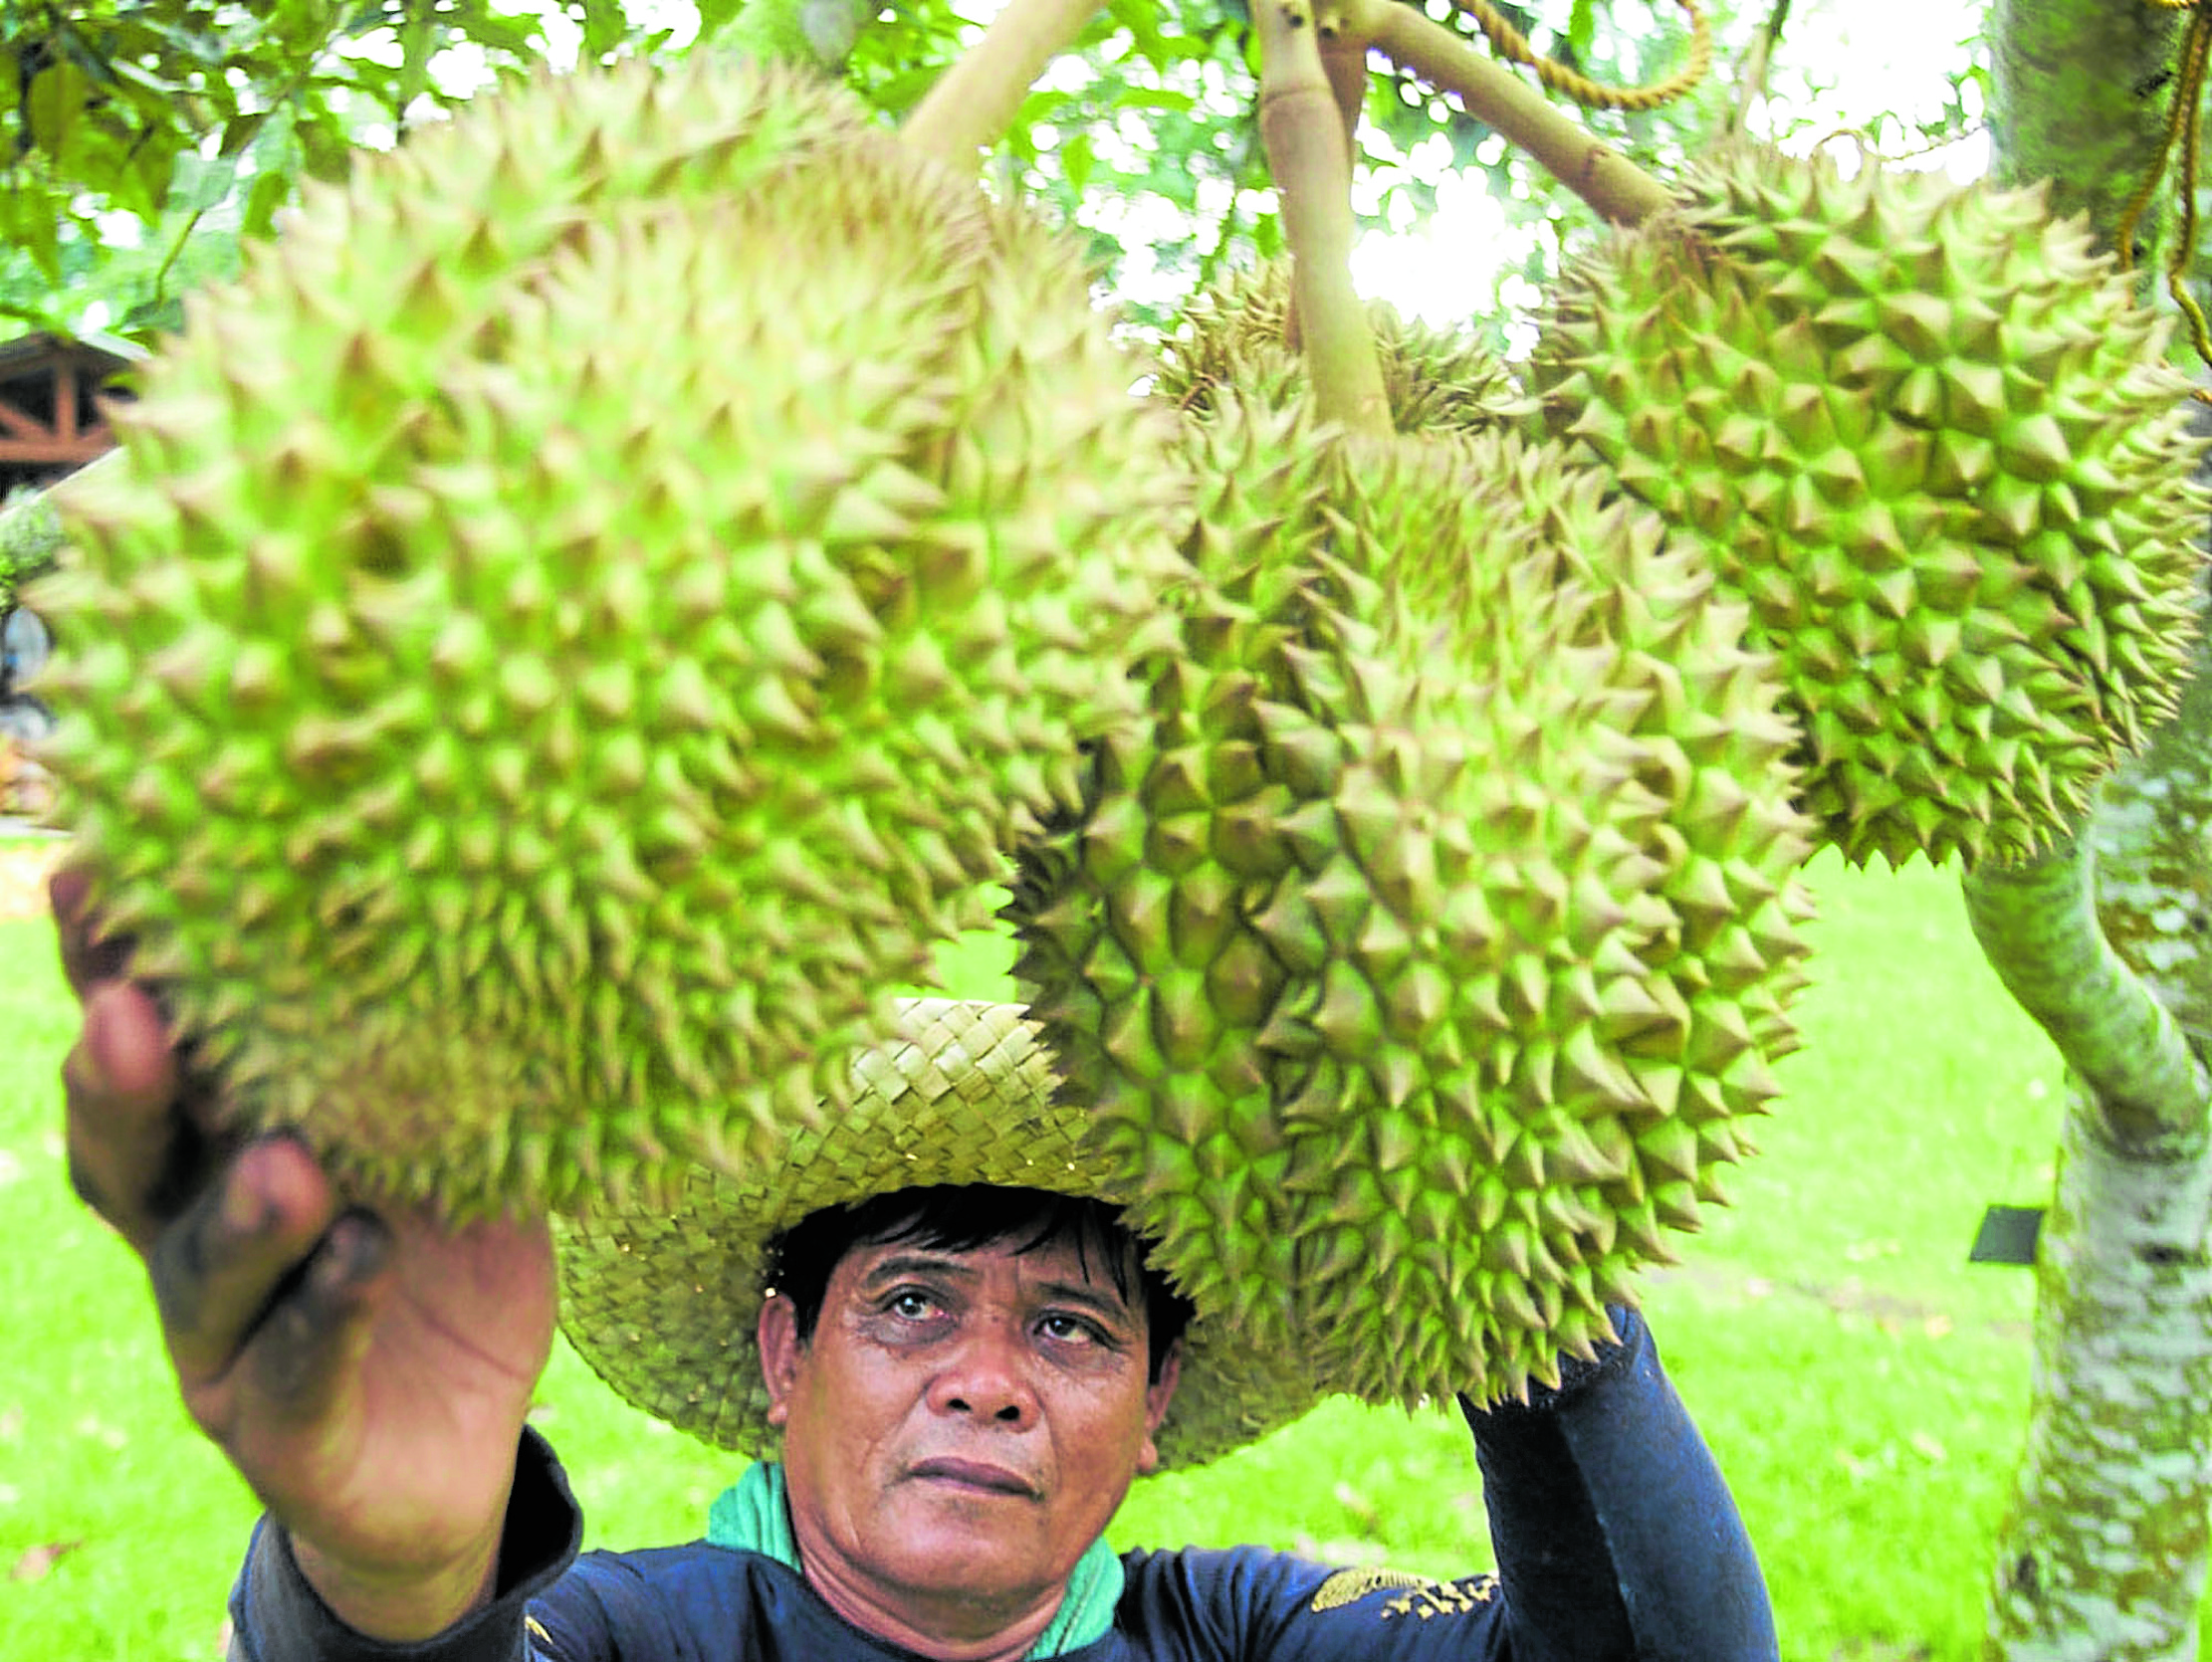 The Davao region, the country’s main source of durian, has reason to cheer, according to the President